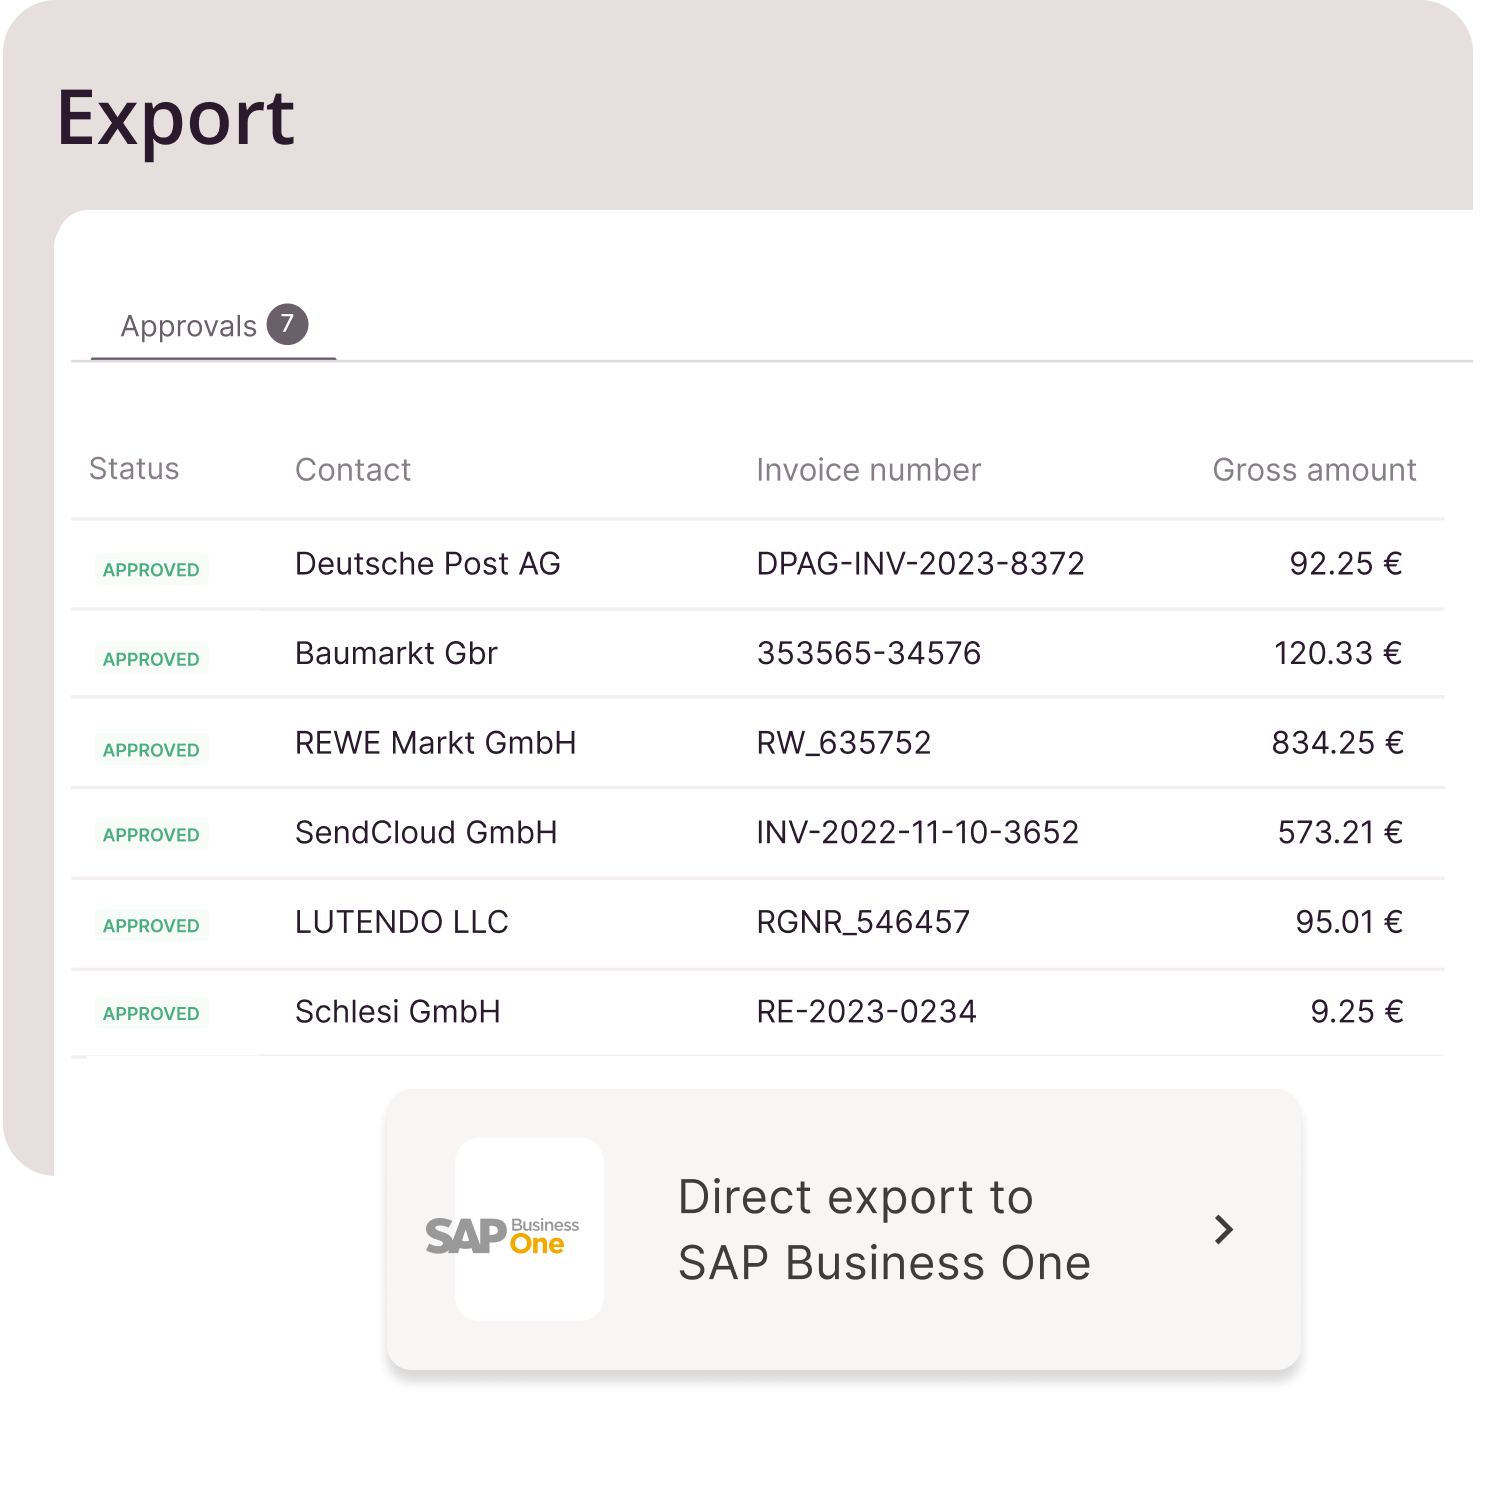 Directly export to SAP Business One 